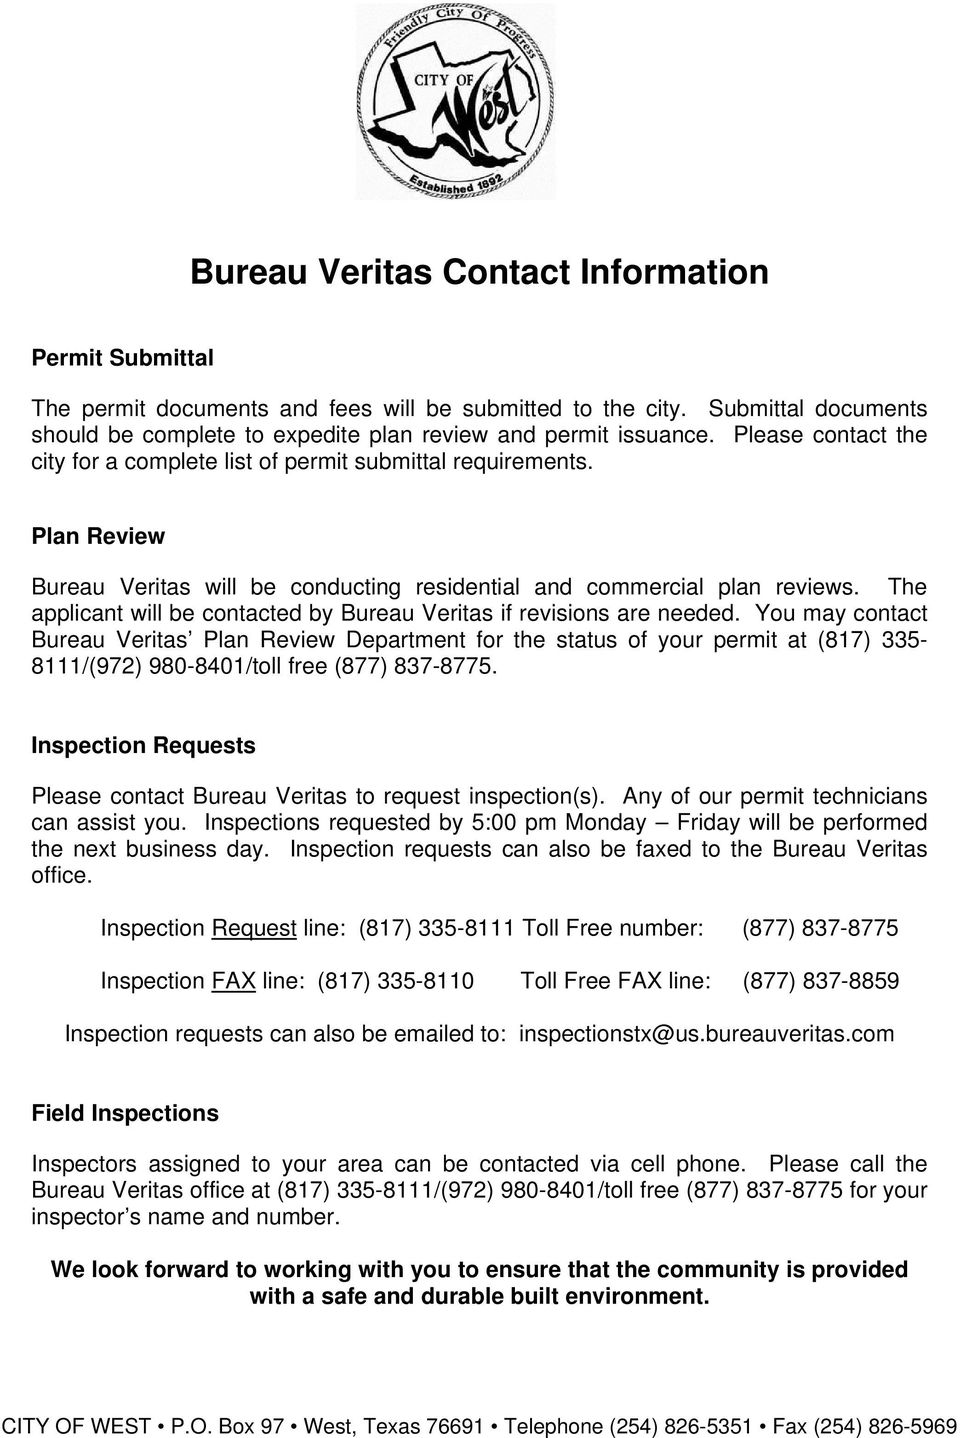 The applicant will be contacted by Bureau Veritas if revisions are needed.